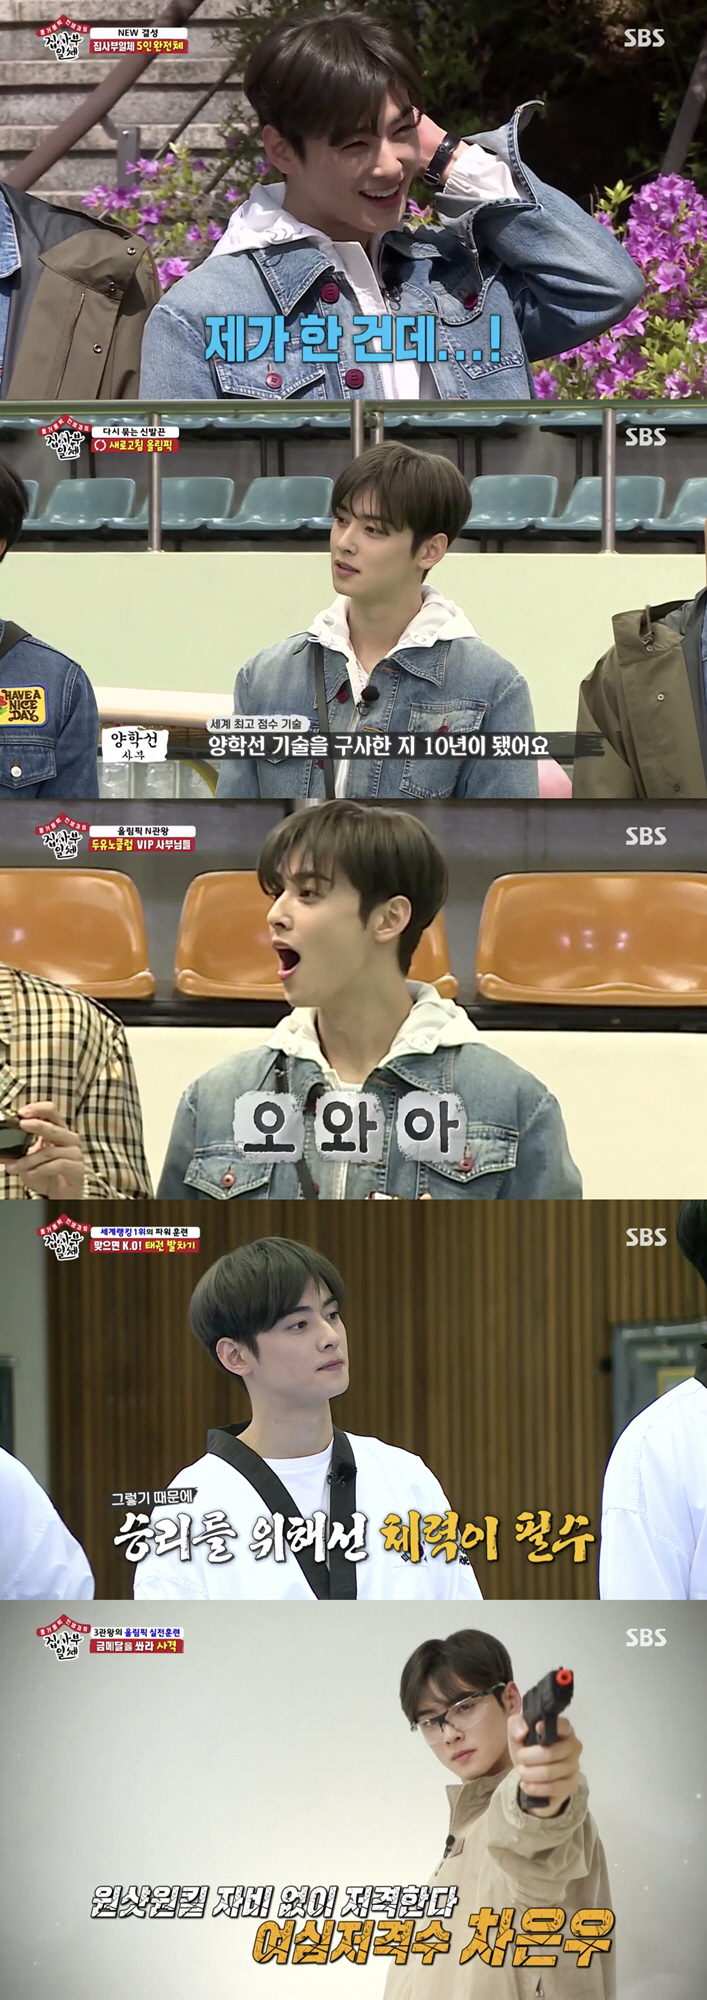 In the SBS entertainment All The Butlers broadcast on the last three days, the meeting of the newly completed five disciples and the Olympic Games Legend Master was drawn with the joining of Cha Eun-woo.Cha Eun-woo said, Can I see this?I admired it one after another.In the first Taekwondo training with Master Lee Dae-hoon, Cha Eun-woo was recognized as an ace.Cha Eun-woo, who was running Wow at the Le Bron Basketball Battle: Mortal Combat Warr demonstration, whose masters dimension is different, was immediately involved in the Le Bron Basketball Battle: Mortal Combat Warr experience, where the victorious spirit was invoked, the extraordinary flame Le Bron Basketball Battle: Mortal Comb At Warr was presented.So, Master Lee Dae-hoon praised Cha Eun-woos Le Bron Basketball Battle: Mortal Combat Warr as the first ace.In a 5–1 matchup with the Masters, thanks to praise, Cha Eun-woo led the team to a win with a one-shot Le Bron Basketball Battle: Mortal Combat Warr.In addition, during the training of Master Jin Jong-ohs shooting training, he survived to the end with Lee Seung-gi in the long-lasting mission and was reborn as a passion duo.As such, Cha Eun-woo has been a disciple of the new passion wind to All The Butlers and caught the attention.In addition to the openings acupressure foothold, the masters powerful Le Bron Basketball Battle: Mortal Combat Warr also endured and showed his commitment, and received praise from the masters in an active movement stemming from the desire to win.Among them, Le Bron Basketball Battle: Mortal Combat Warr, and seeing ice cream that falls or rewards, like a child, gives viewers a smile.Cha Eun-woo, who joined the All The Butlers and gave new energy to the house theater on the weekend evening, is looking forward to more challenges and enthusiasm to show in the future.On the other hand, SBS entertainment All The Butlers starring Cha Eun-woo is broadcast every Sunday at 6:25 pm.